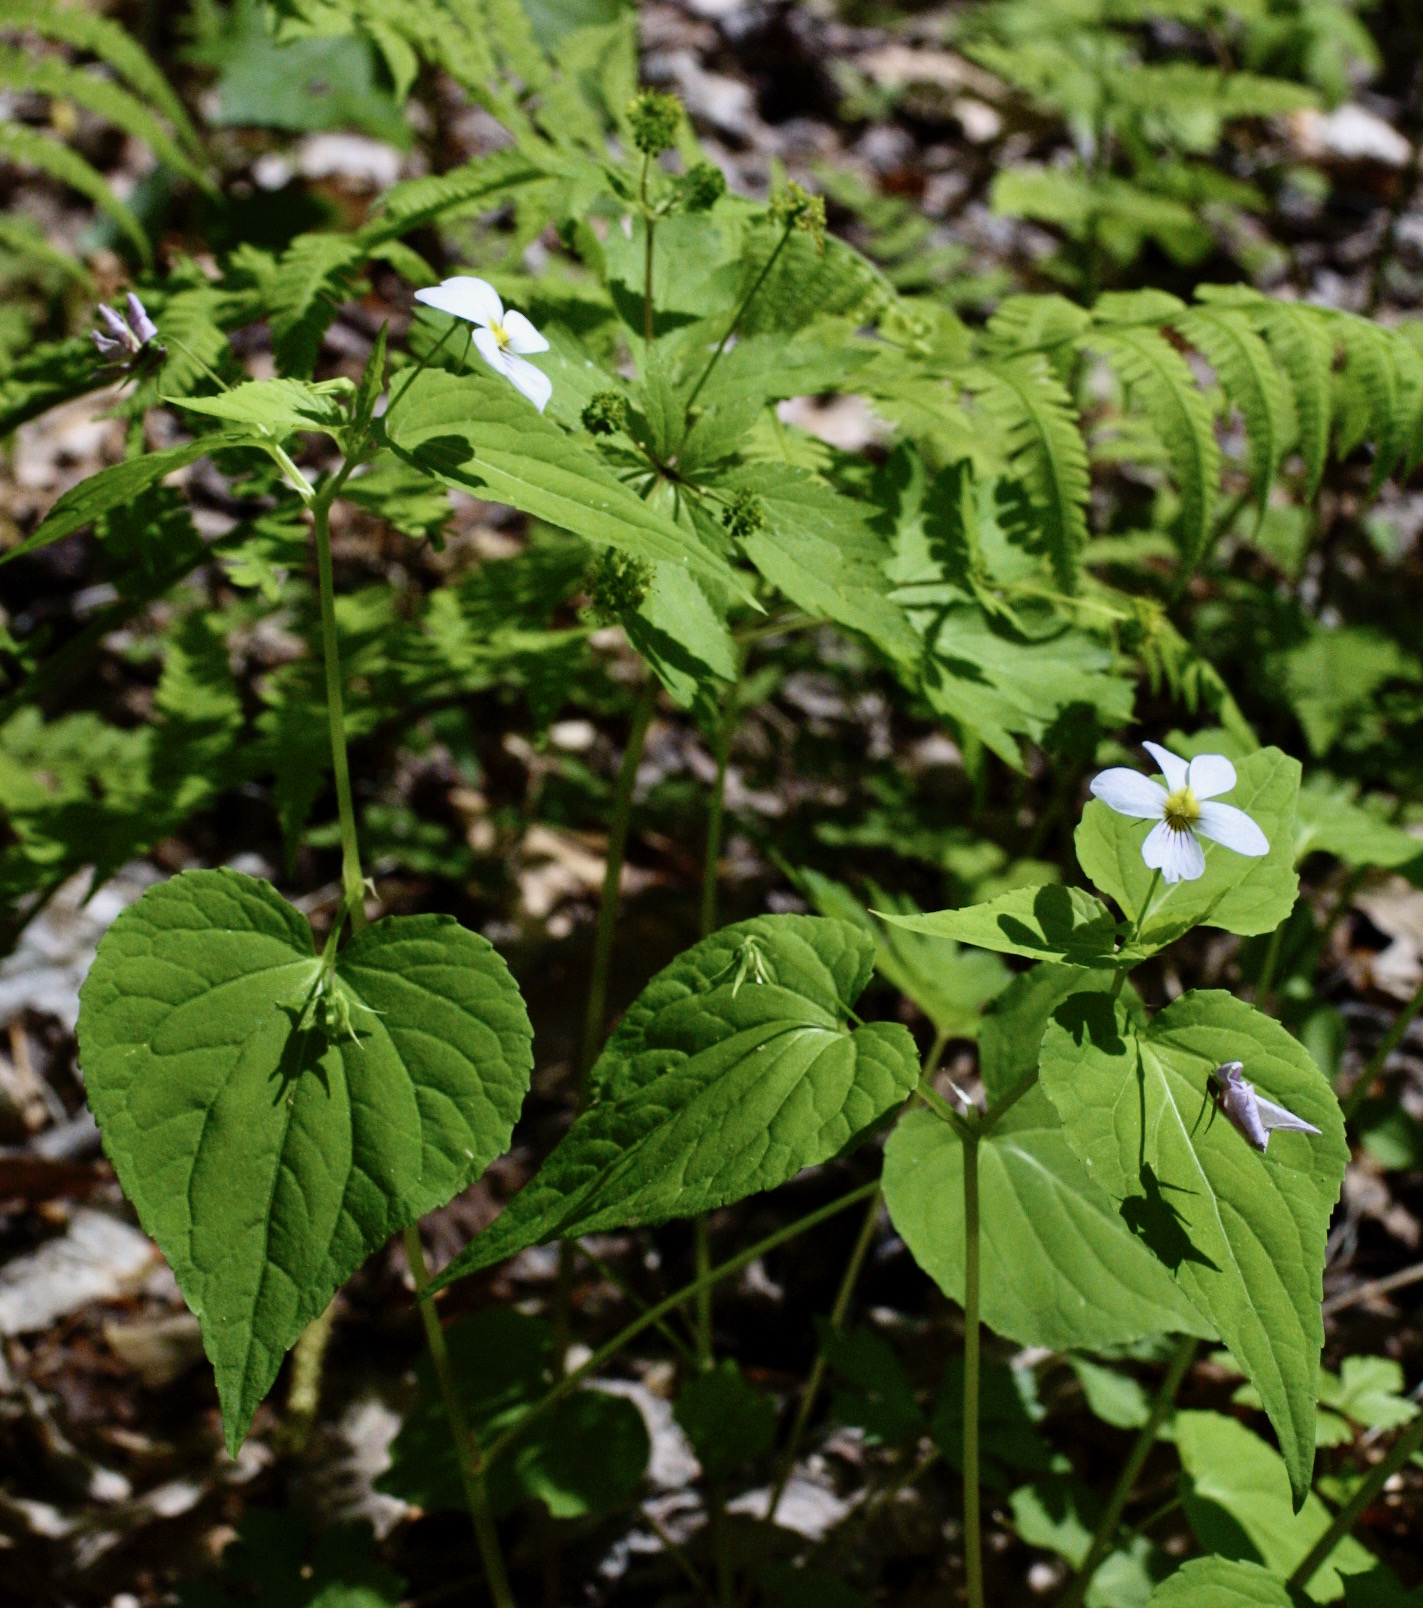 The Scientific Name is Viola canadensis [=Viola canadensis var. canadensis]. You will likely hear them called Tall White Violet, Canada Violet. This picture shows the Stemmed violet with white flowers; note forming fruit of Viola canadensis [=Viola canadensis var. canadensis]